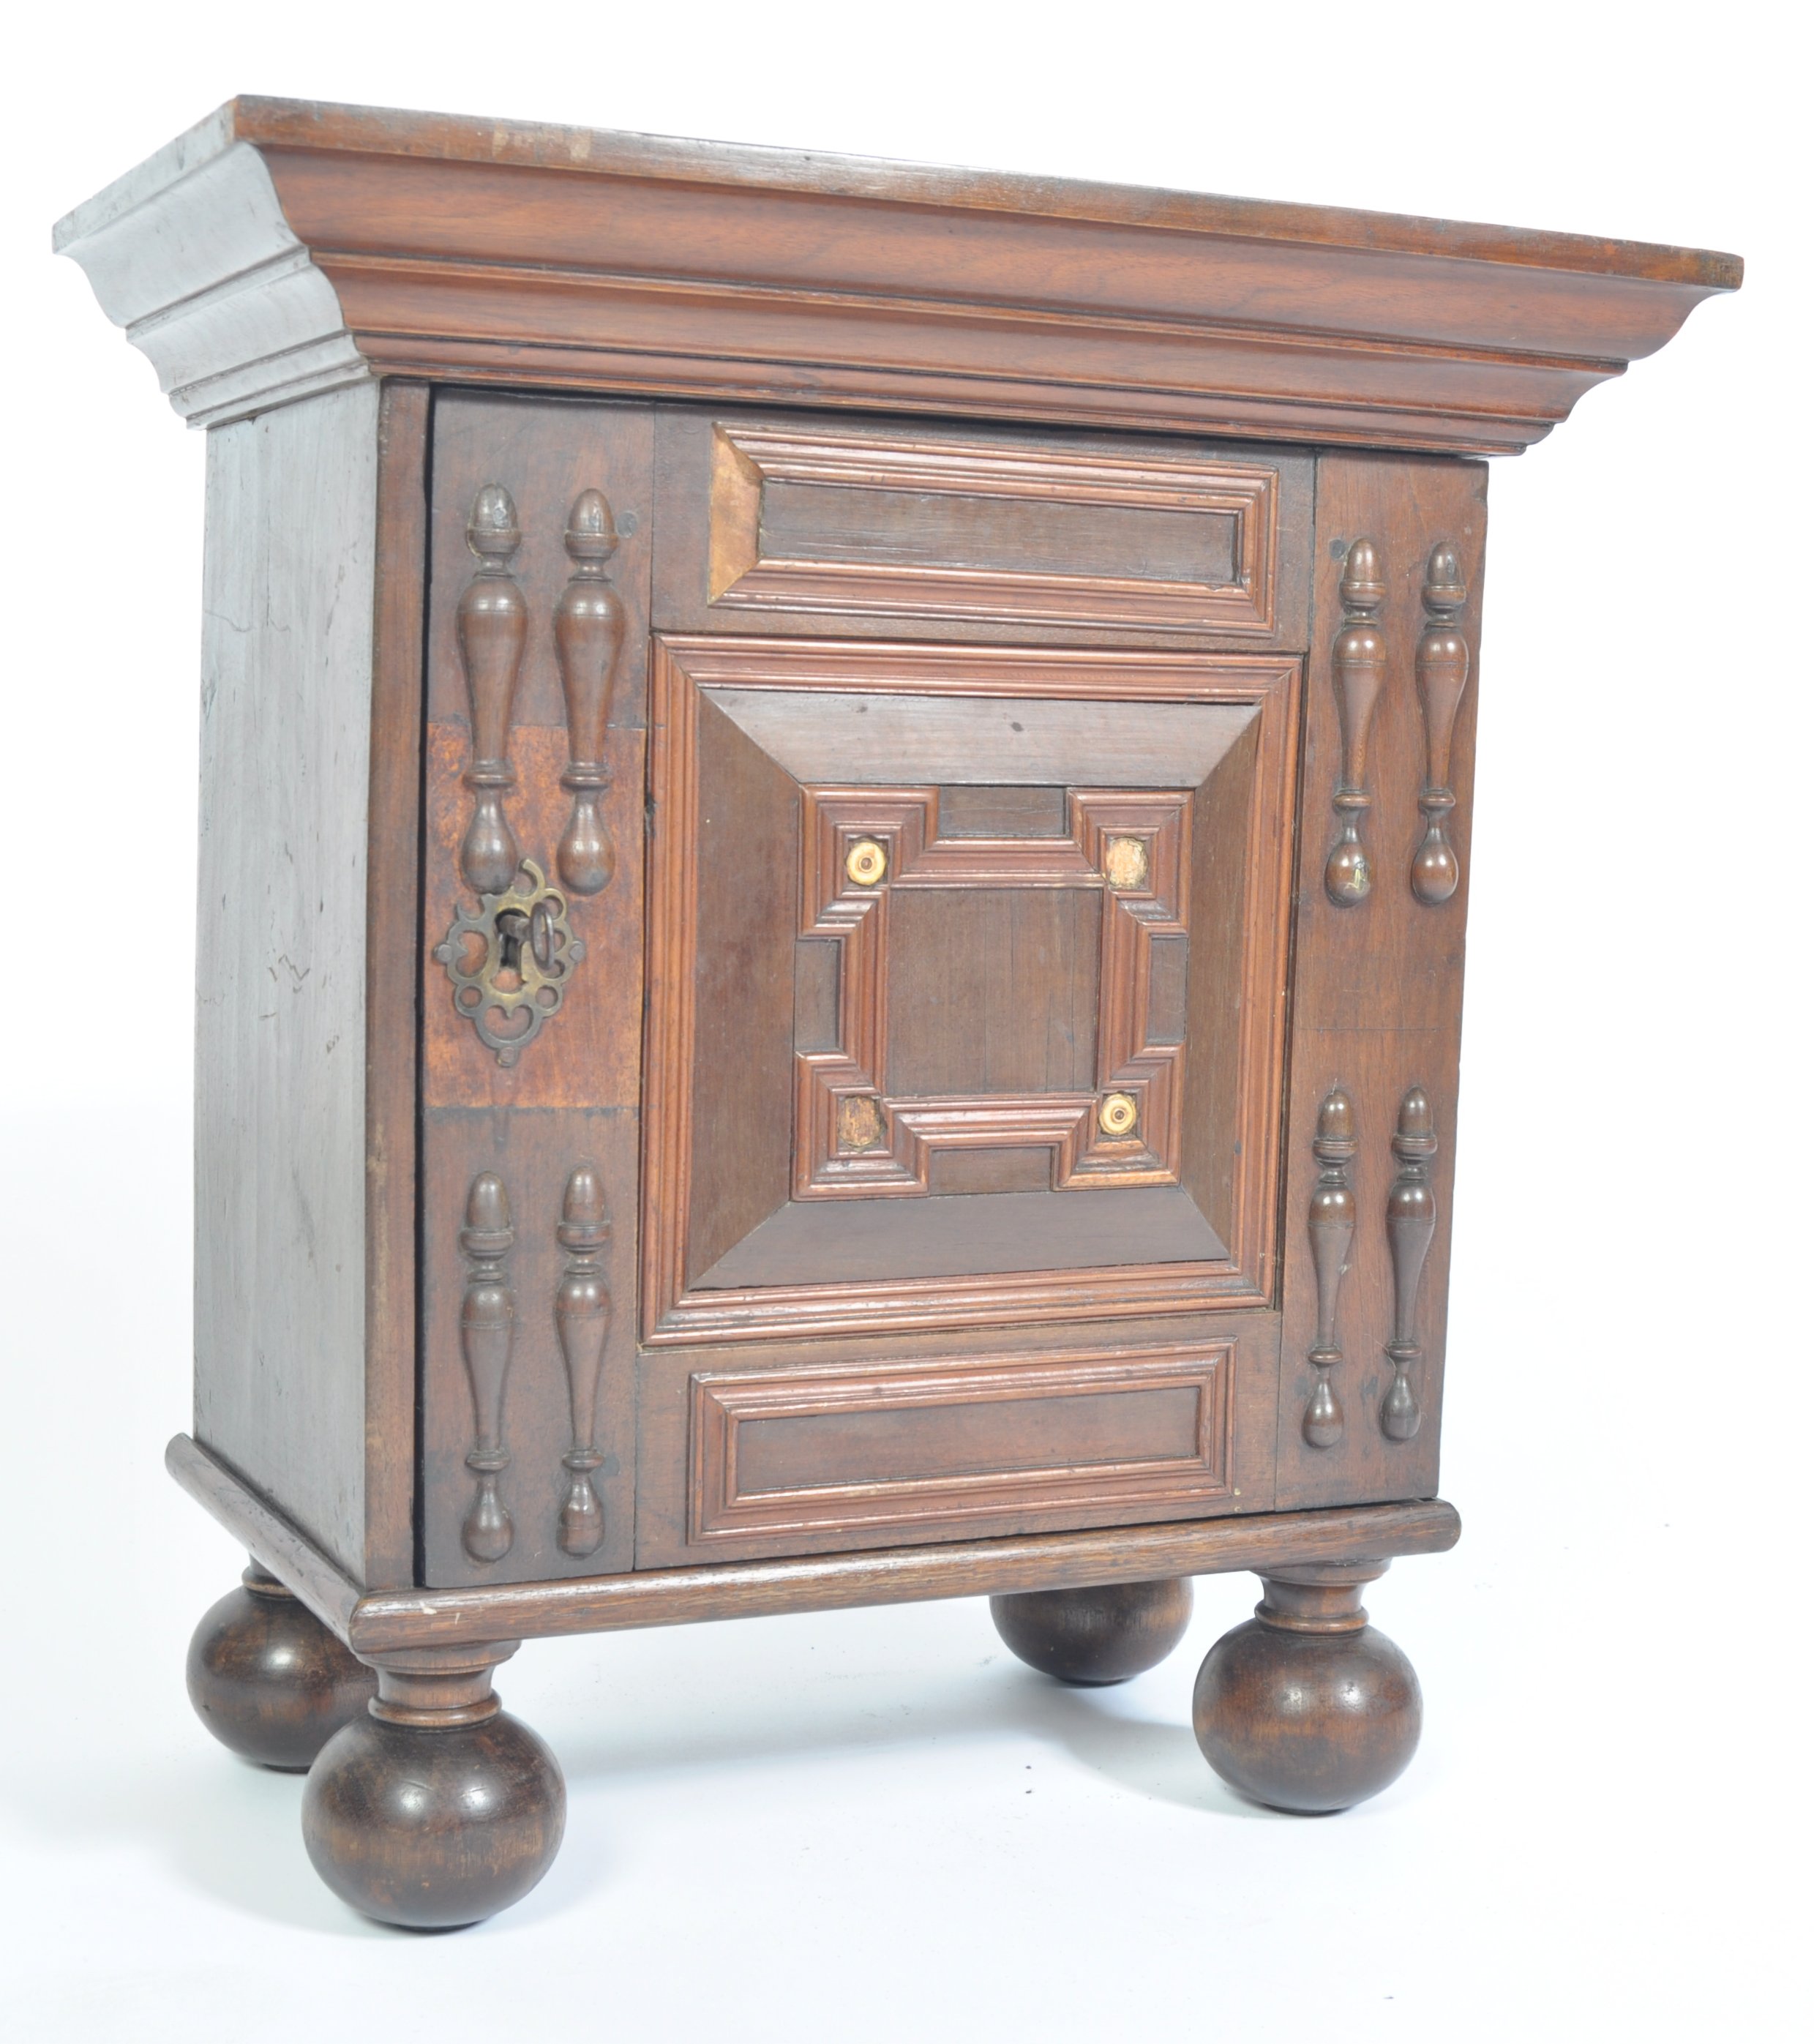 17TH / 18TH CENTURY OAK SPICE OR APOTHECARY CABINET